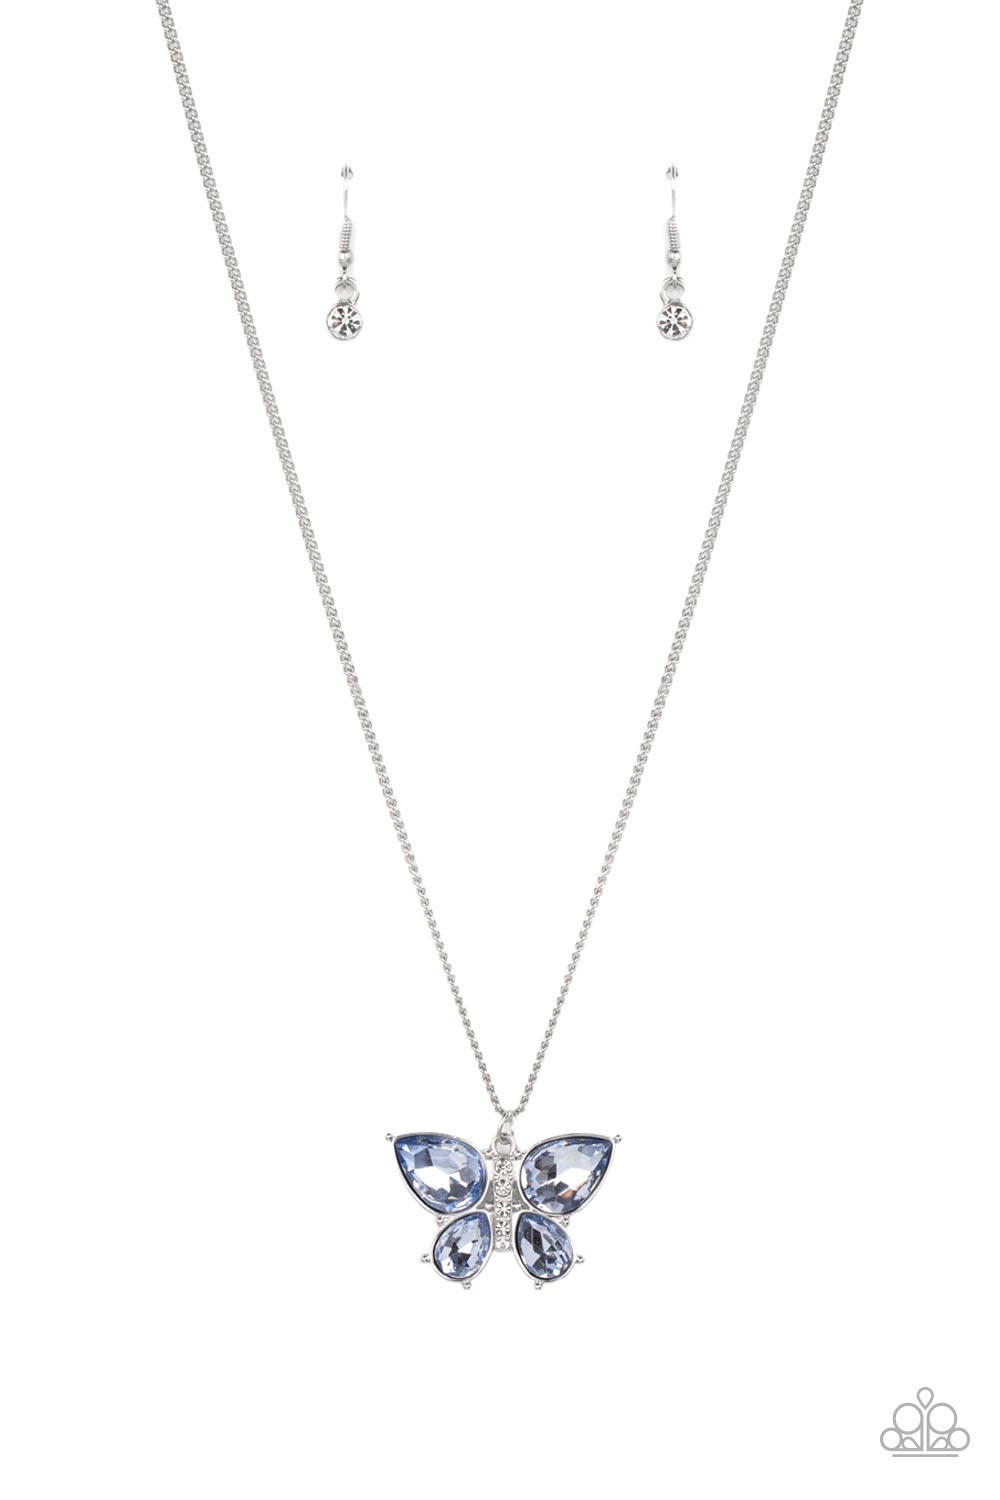 Free-Flying Flutter Blue Rhinestone Butterfly Necklace - Paparazzi Accessories- lightbox - CarasShop.com - $5 Jewelry by Cara Jewels